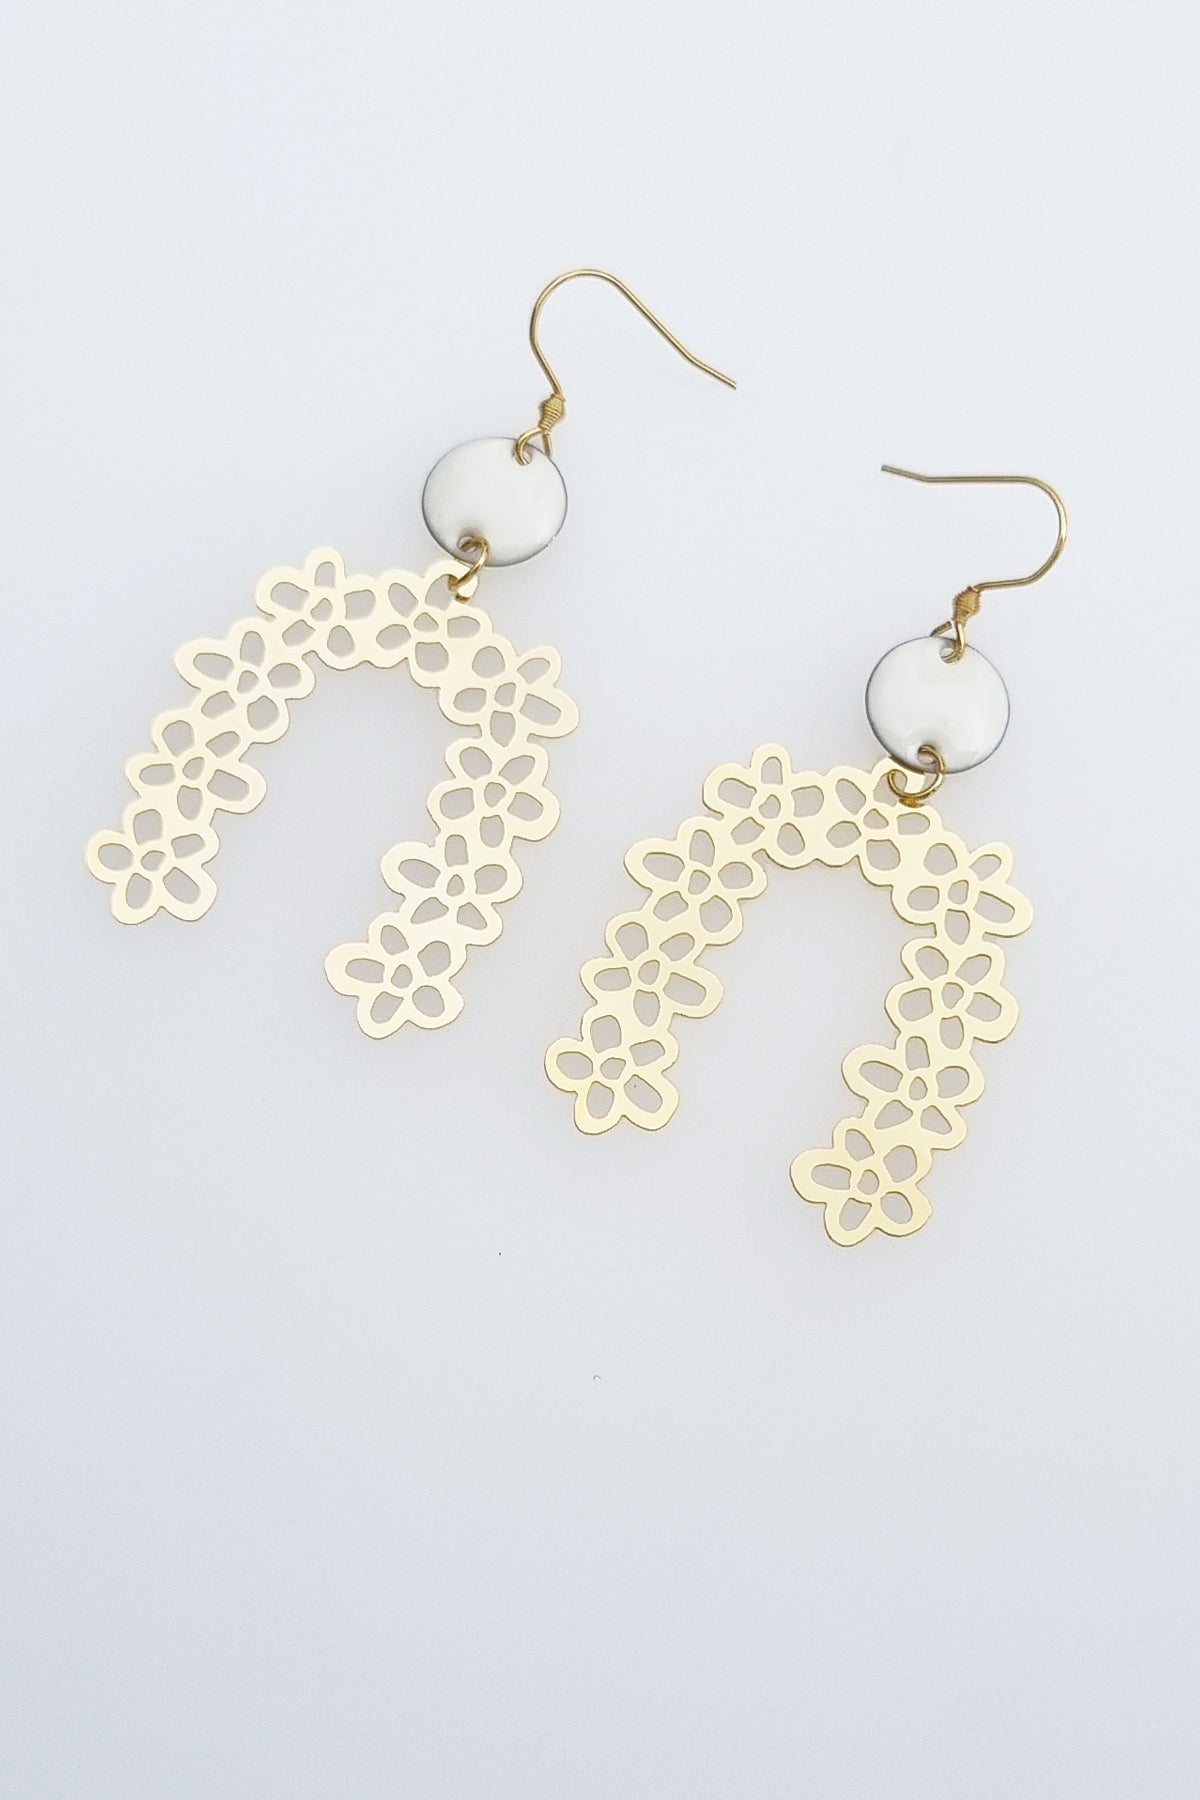 A pair of drop earrings with a hook lay against a white background. They feature a small white connector dot and a floral arch brass piece.